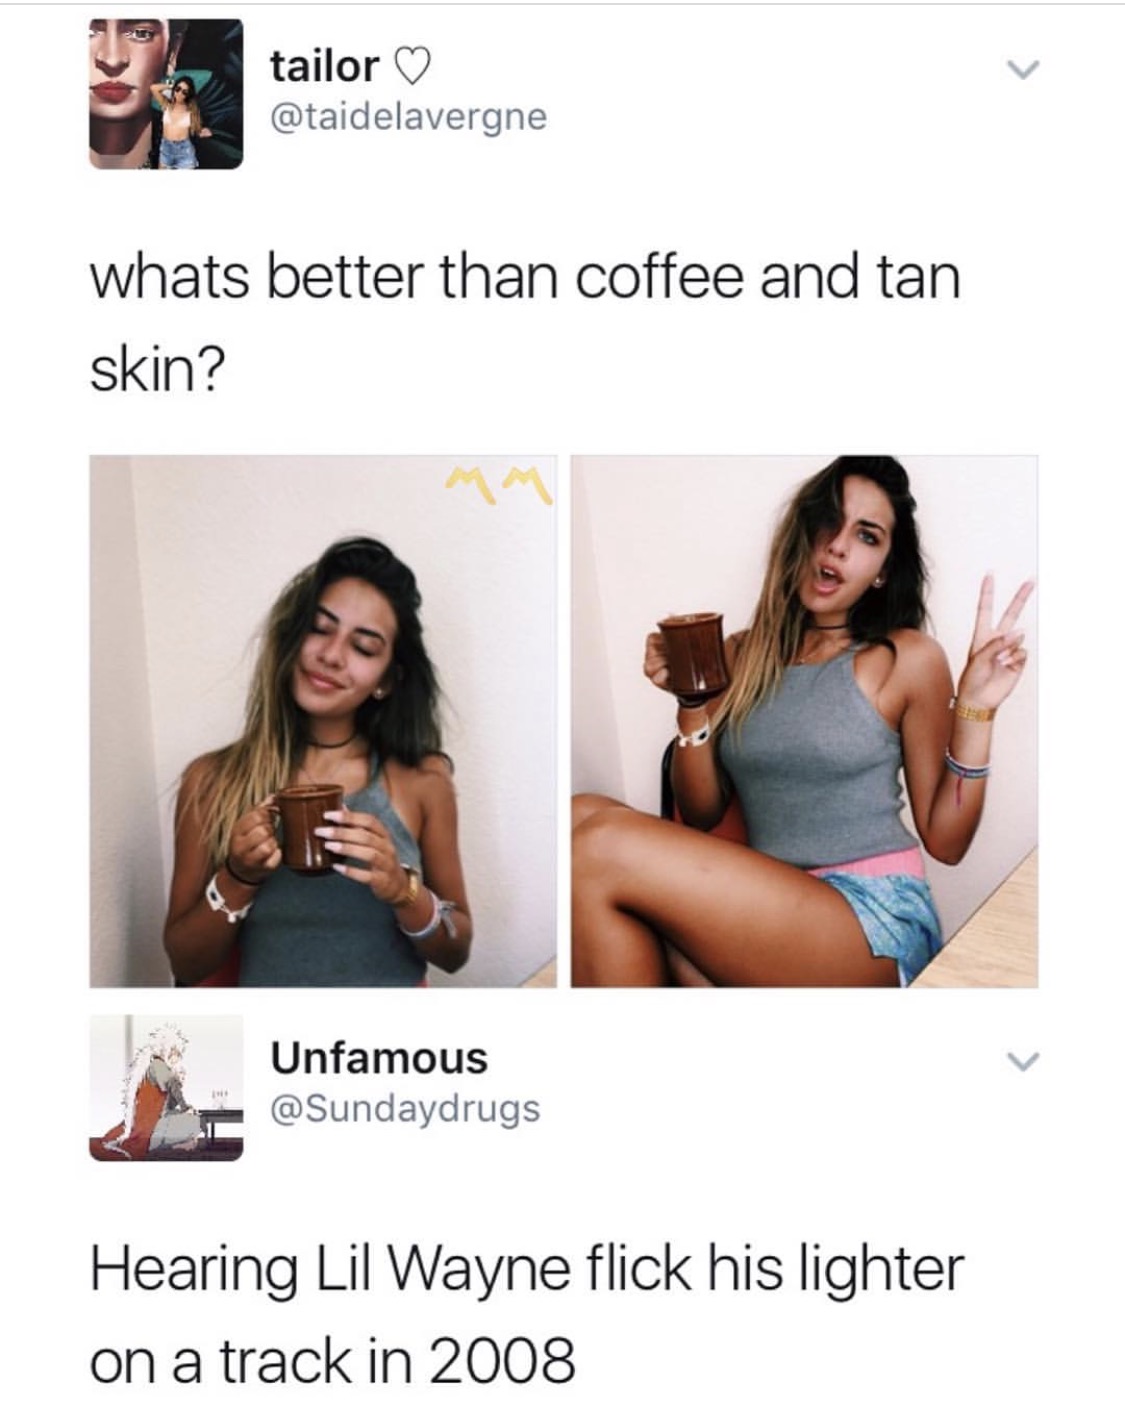 lil wayne lighter flick meme - tailor whats better than coffee and tan skin? Unfamous Hearing Lil Wayne flick his lighter on a track in 2008